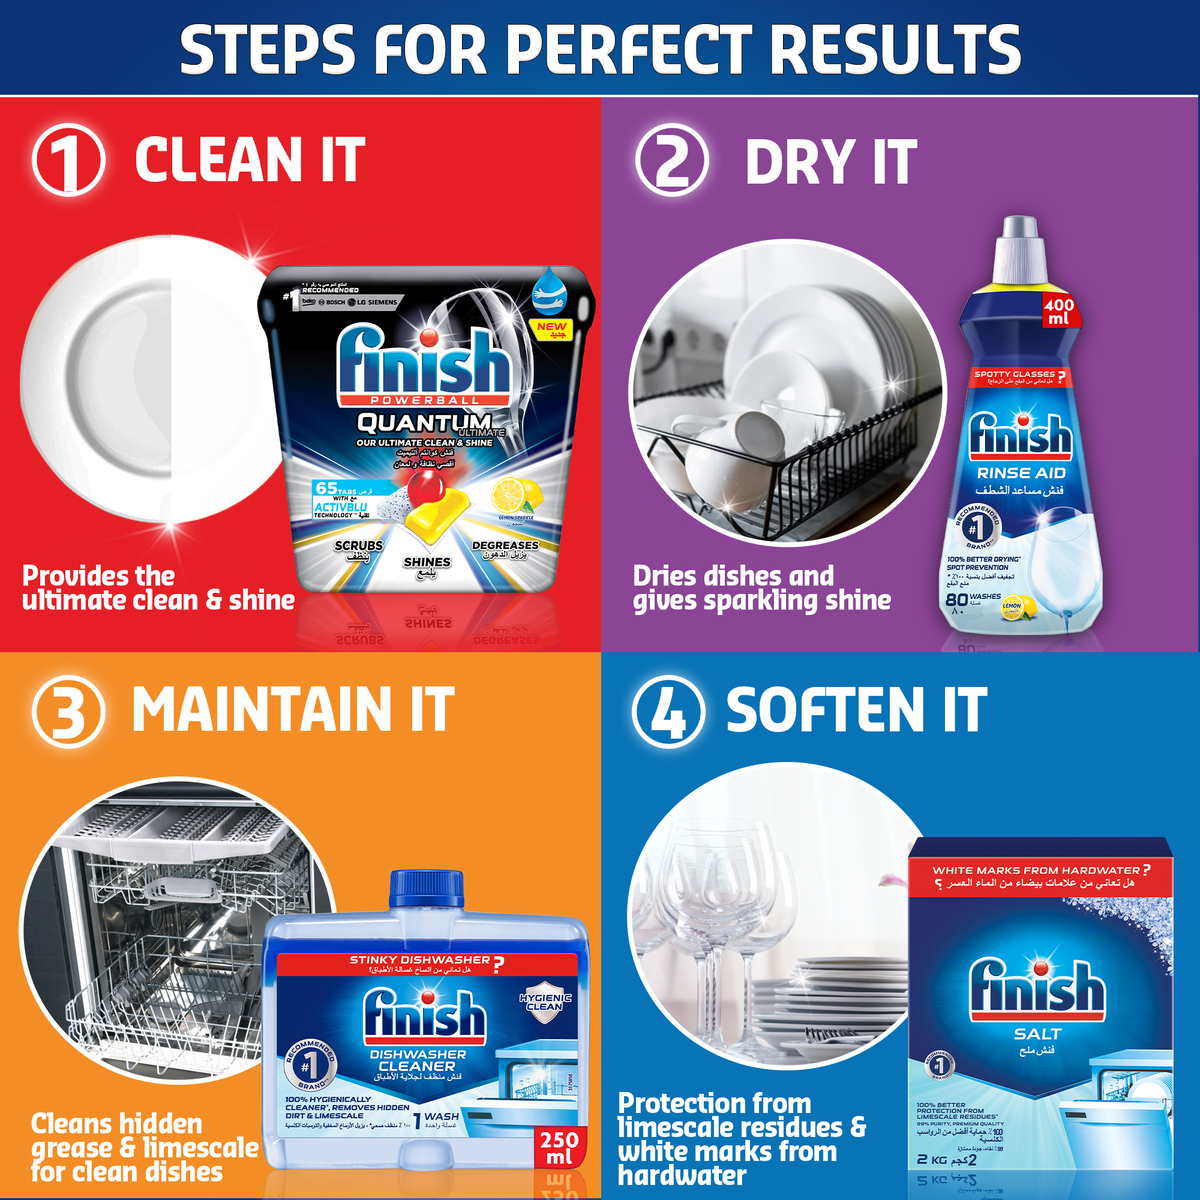 Finish All in 1 Max Concentrate Gel Dishwasher Regular 650 ml